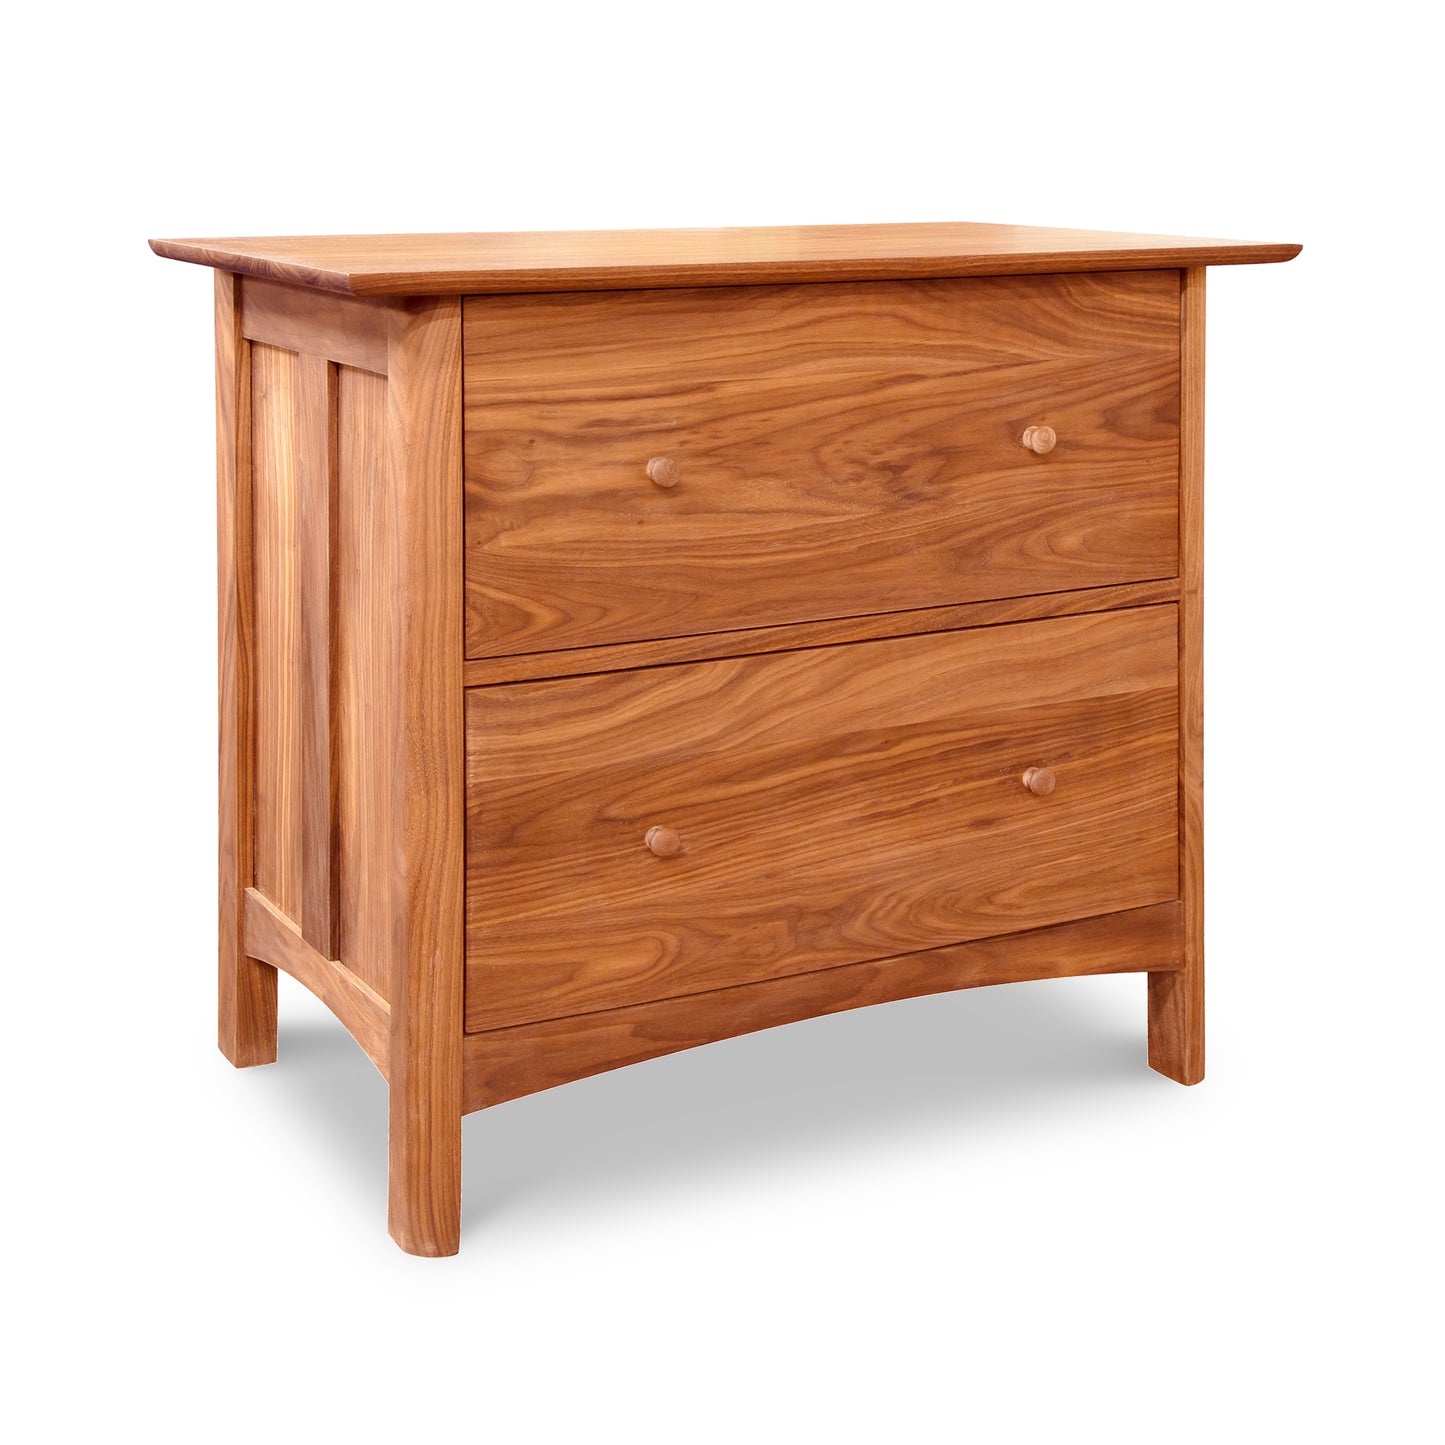 A Heartwood Shaker 2-Drawer Lateral File Cabinet by Vermont Furniture Designs isolated on a white background.